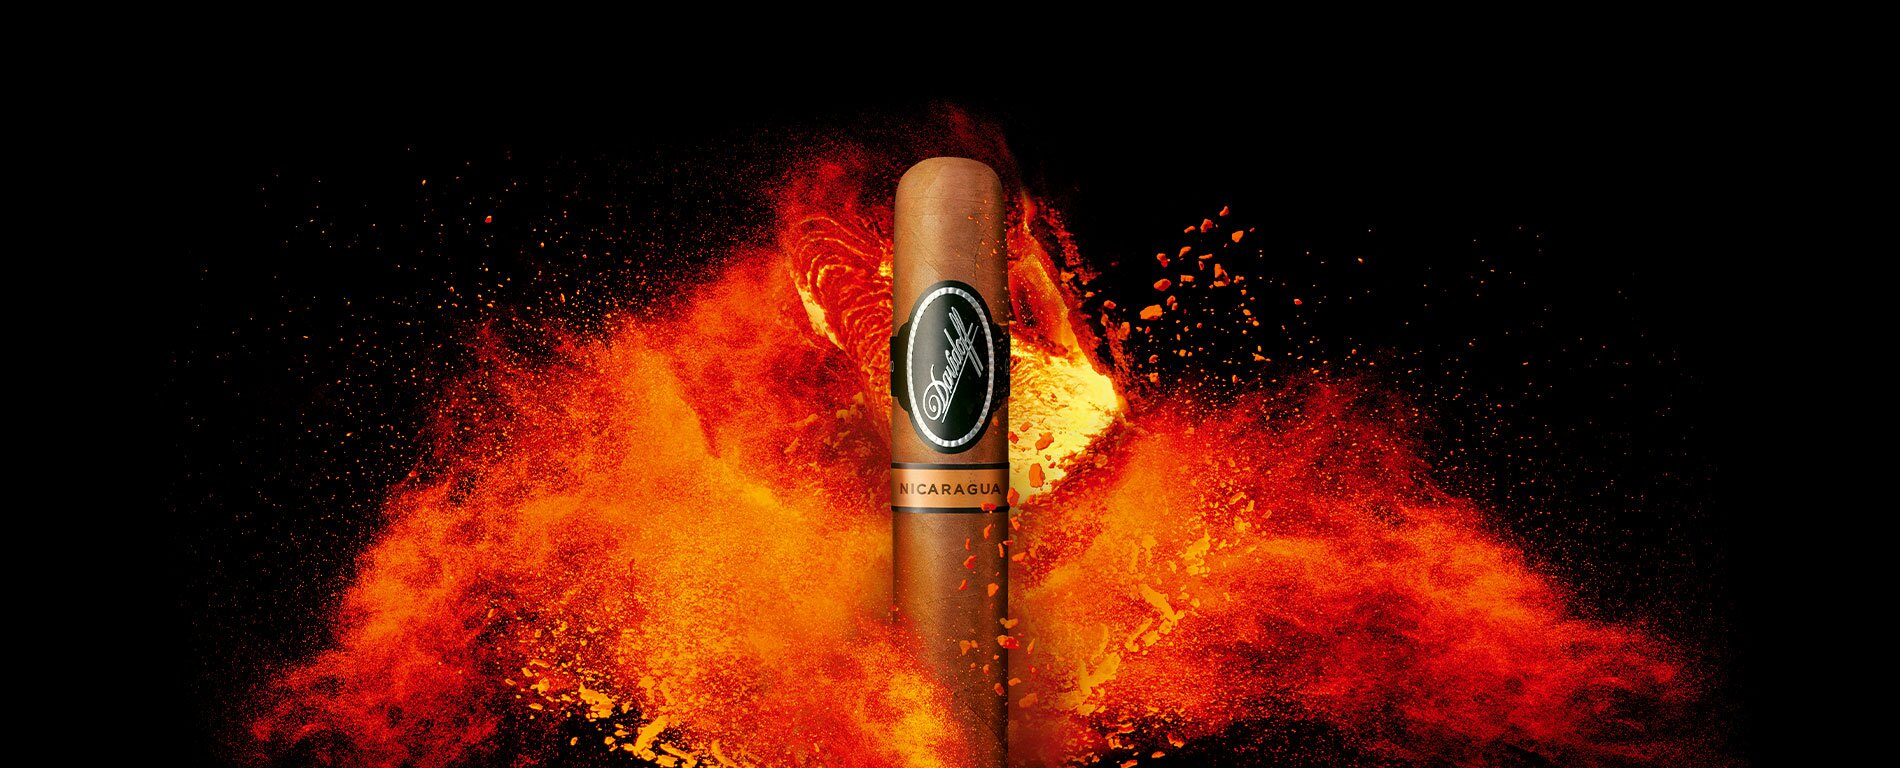 A Davidoff Nicaragua cigar standing in front of a powerful bright orange fire.